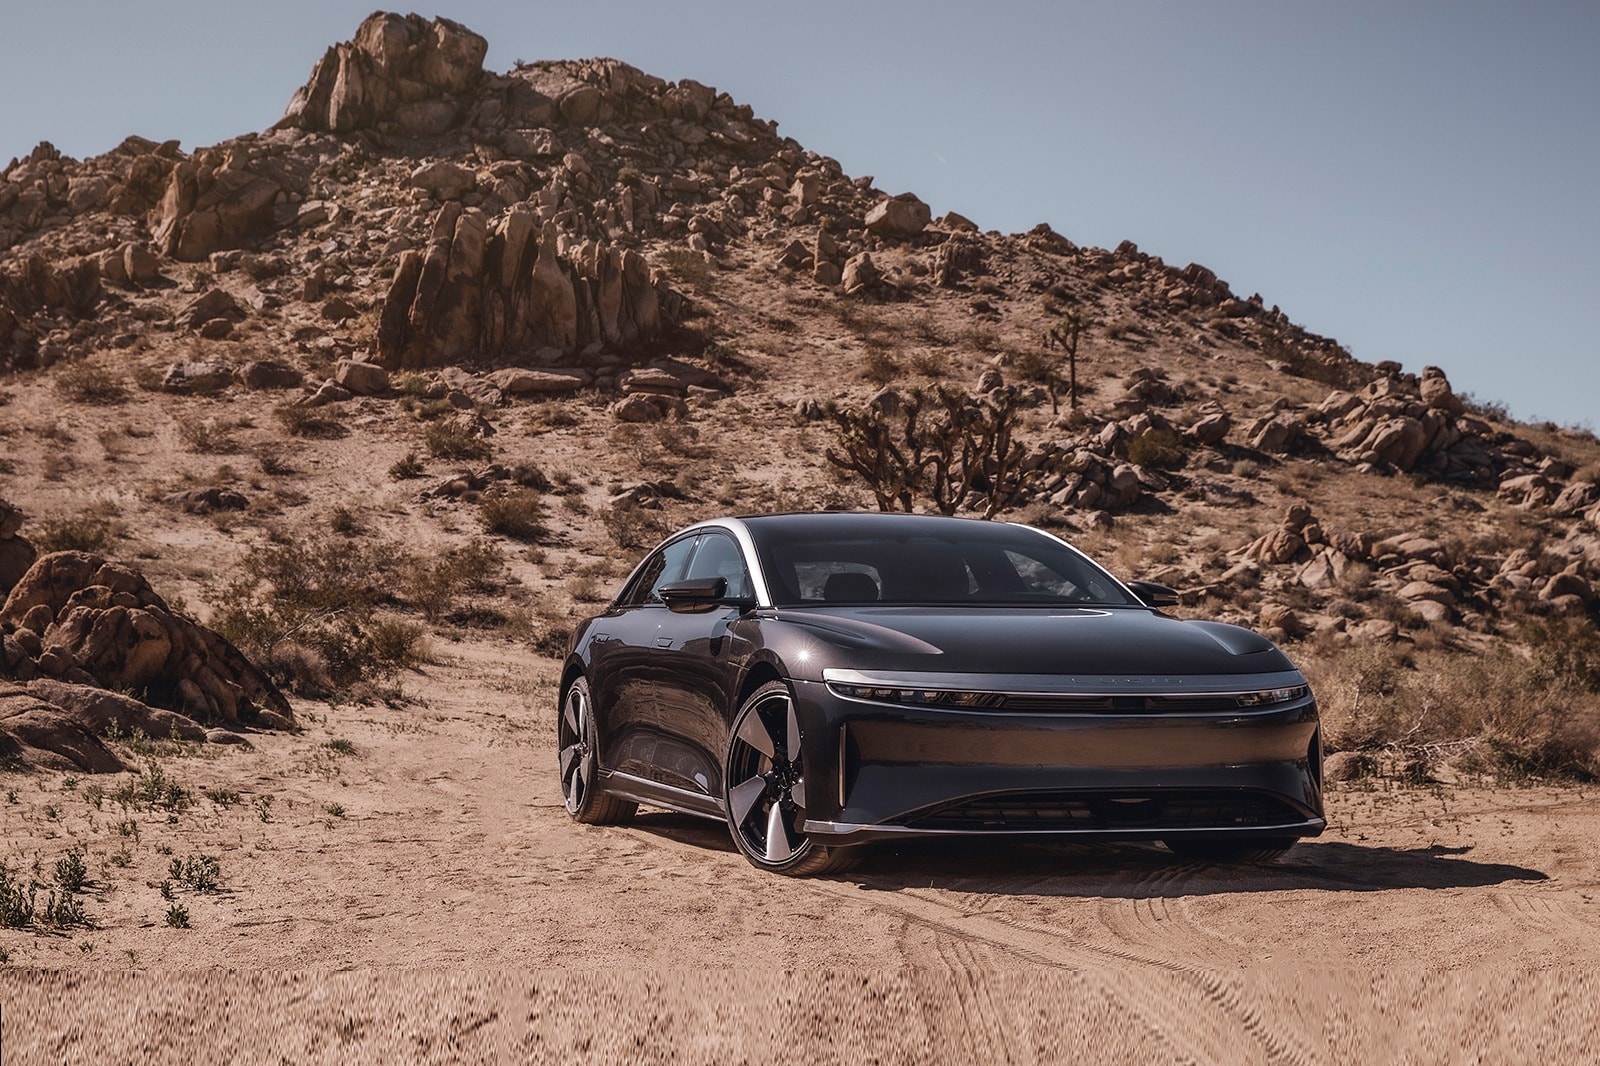 New Lucid Air Grand Touring Performance Has Over 1,000 Horsepower, but Still Won't Beat a Tesla Model S Plaid